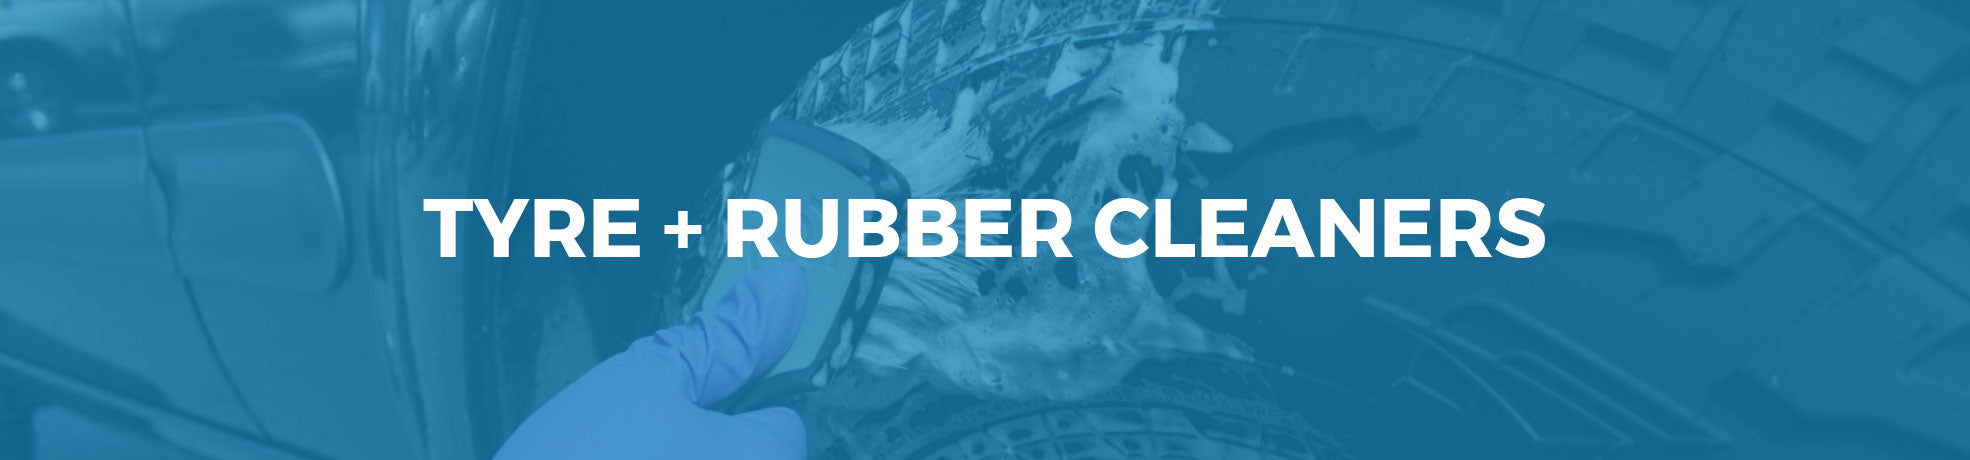 Tyre and Rubber Cleaners